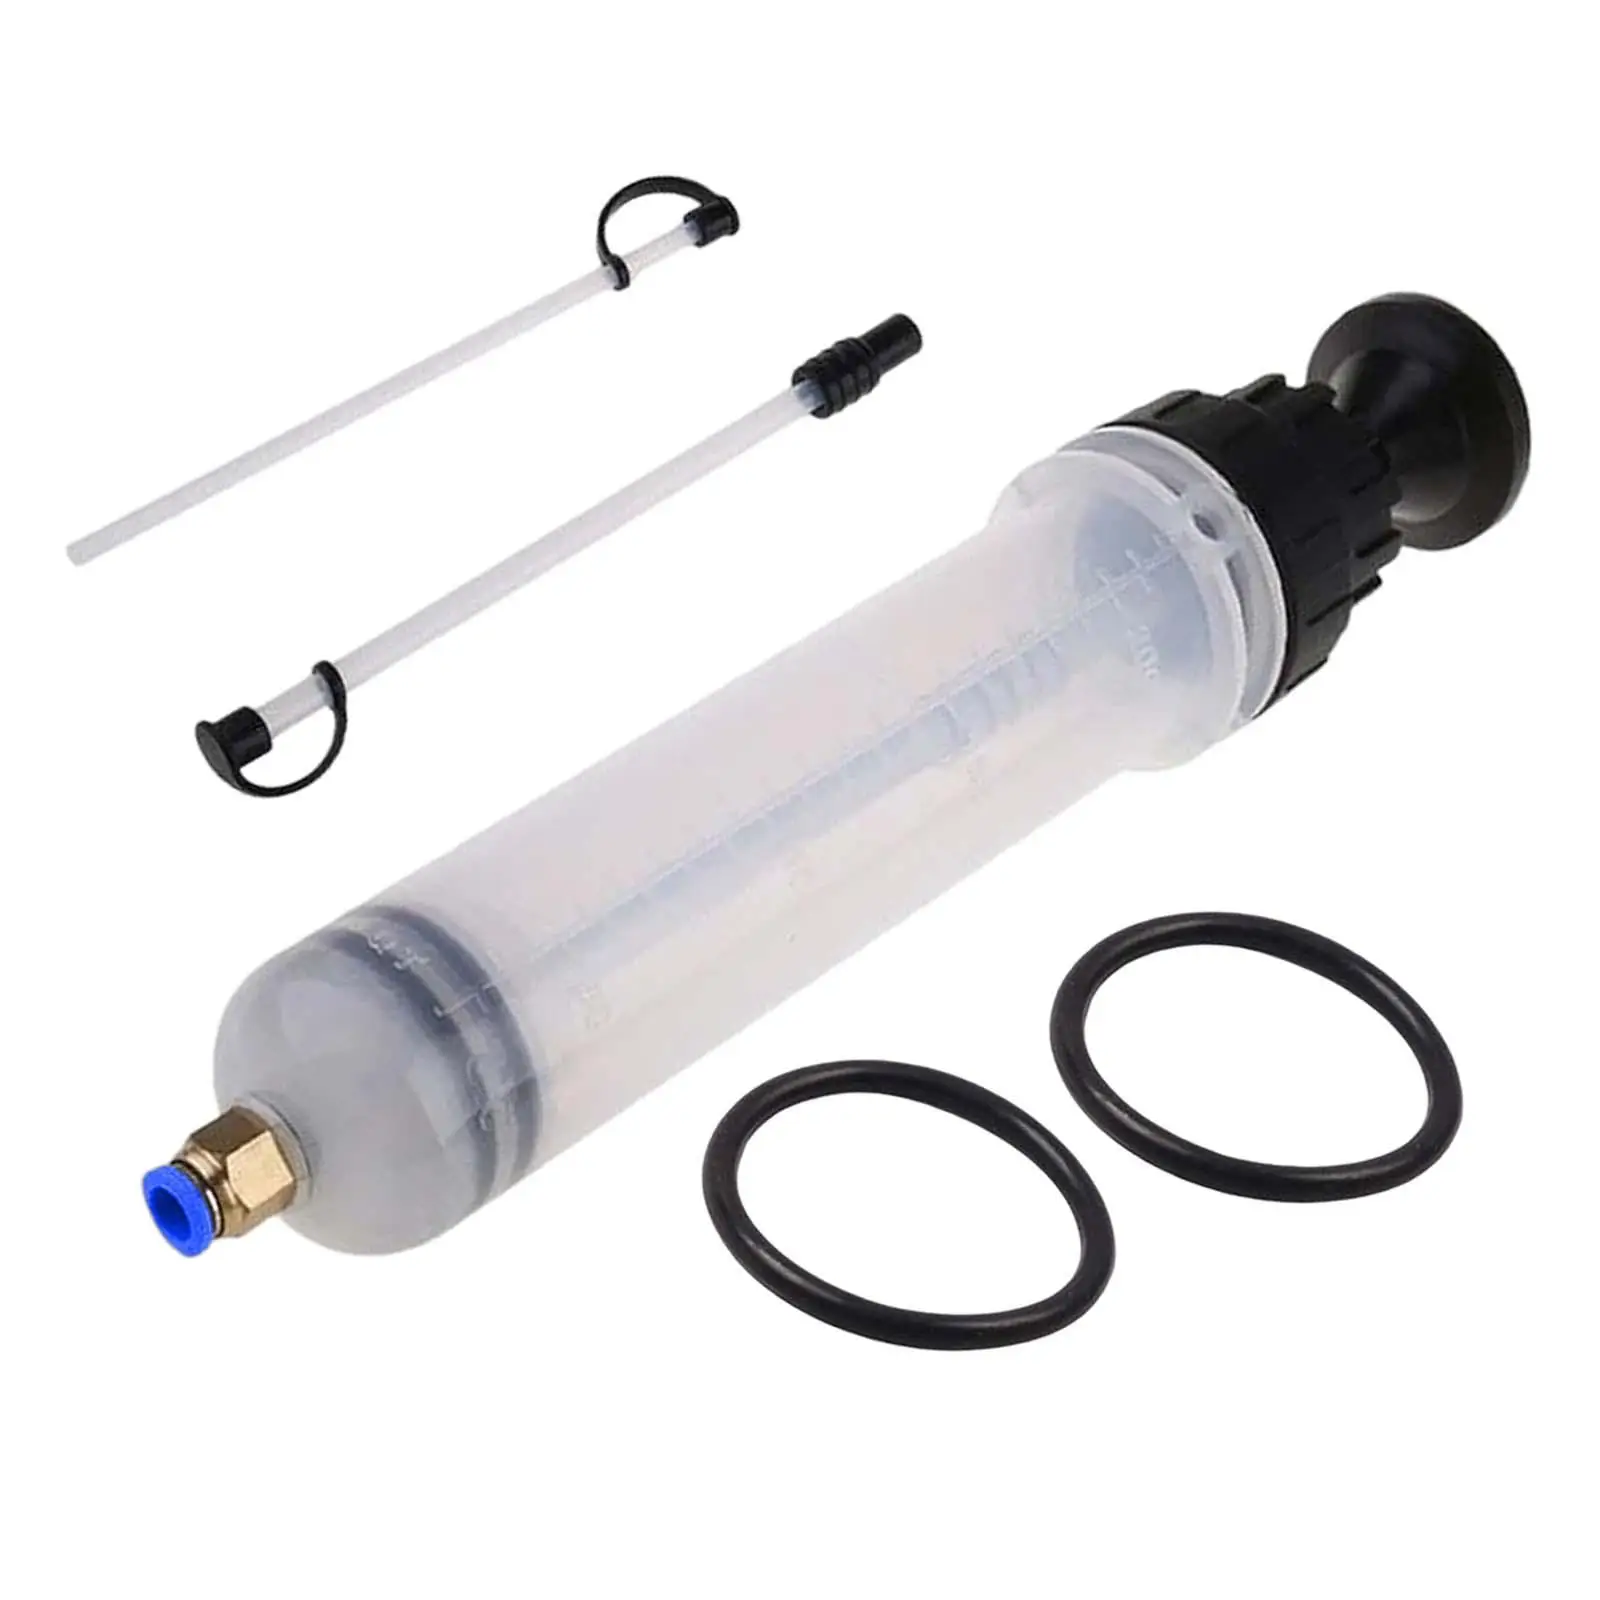 Universal Brake Fluid Extractor Fluid Transfer Hand Pump Replacement Tool Oil Change 500cc for Car Vehicles Boats ATV RV